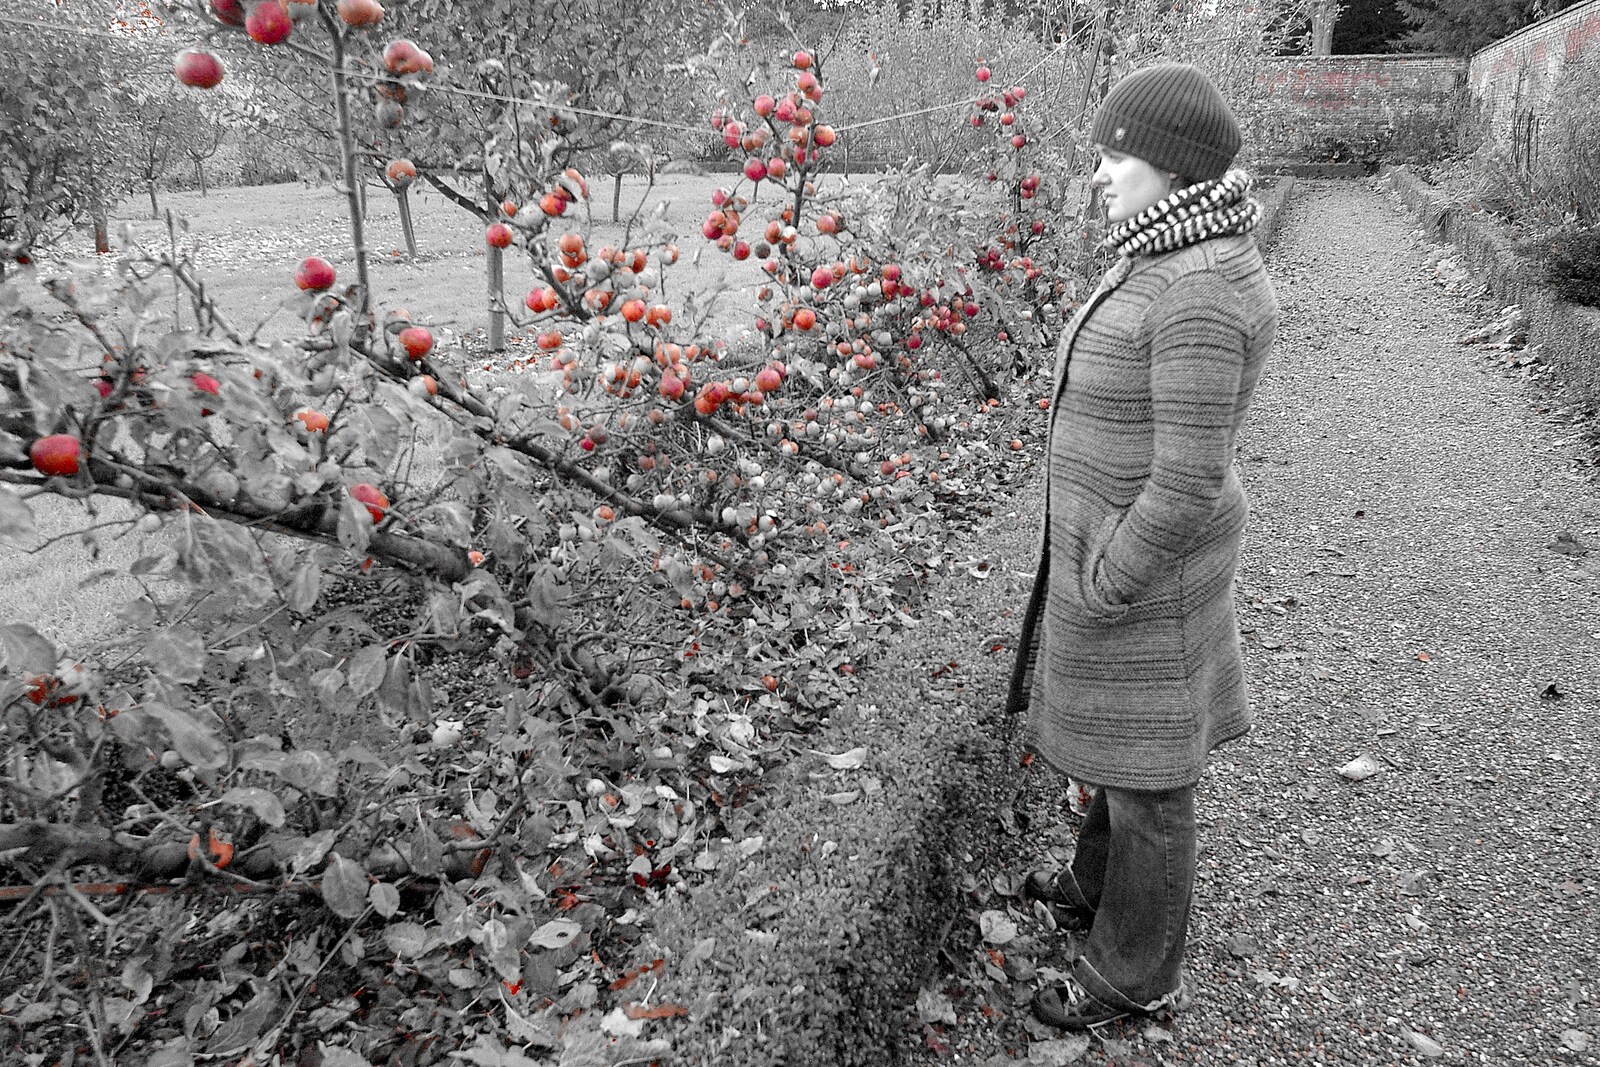 Isobel contemplates the apples in the walled garden from Evidence of Autumn: Thornham Walks, Suffolk - 18th November 2006